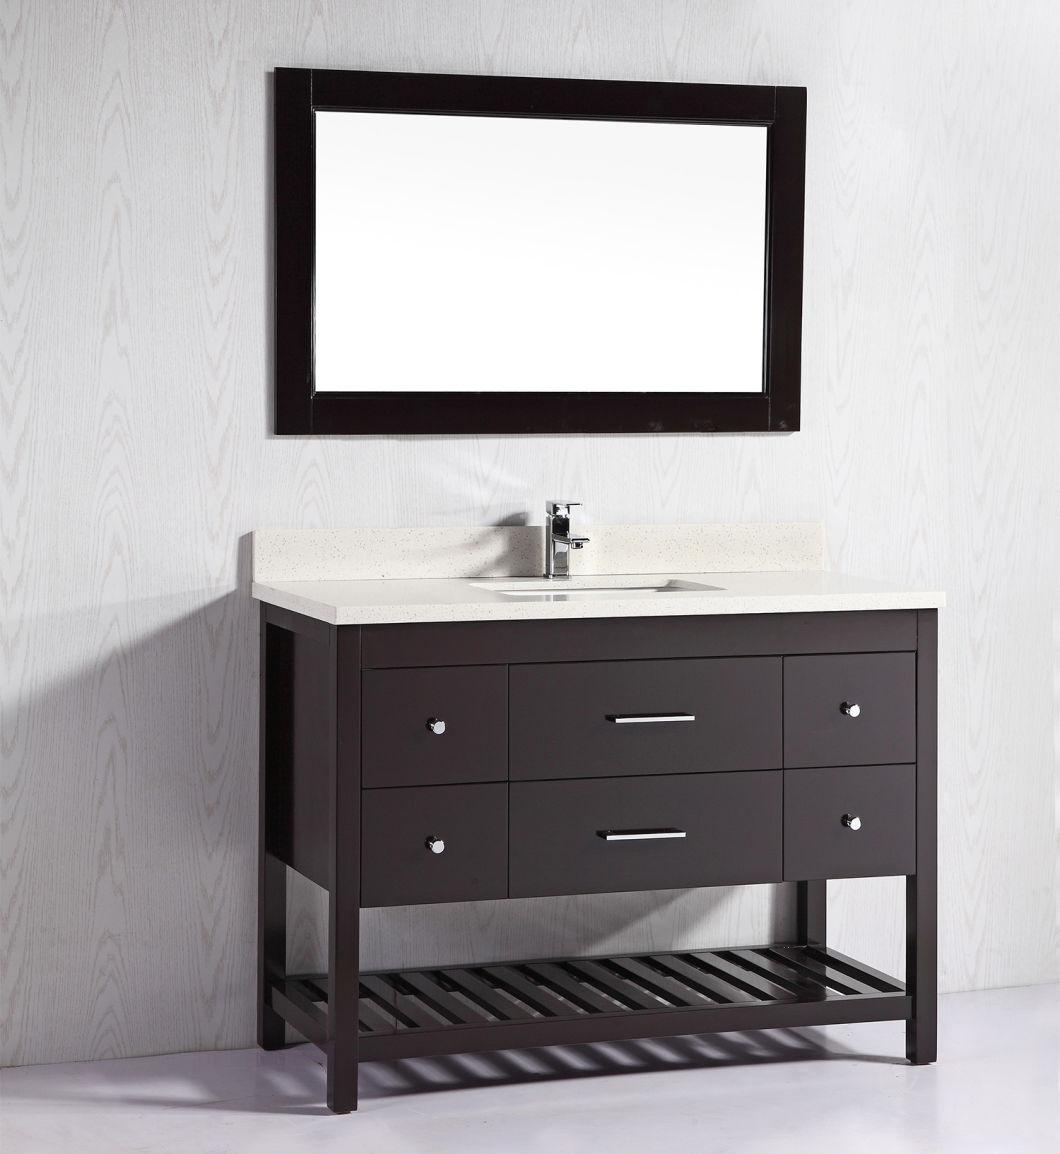 48" Solid Wood Bathroom Furniture with Quartz Top for USA